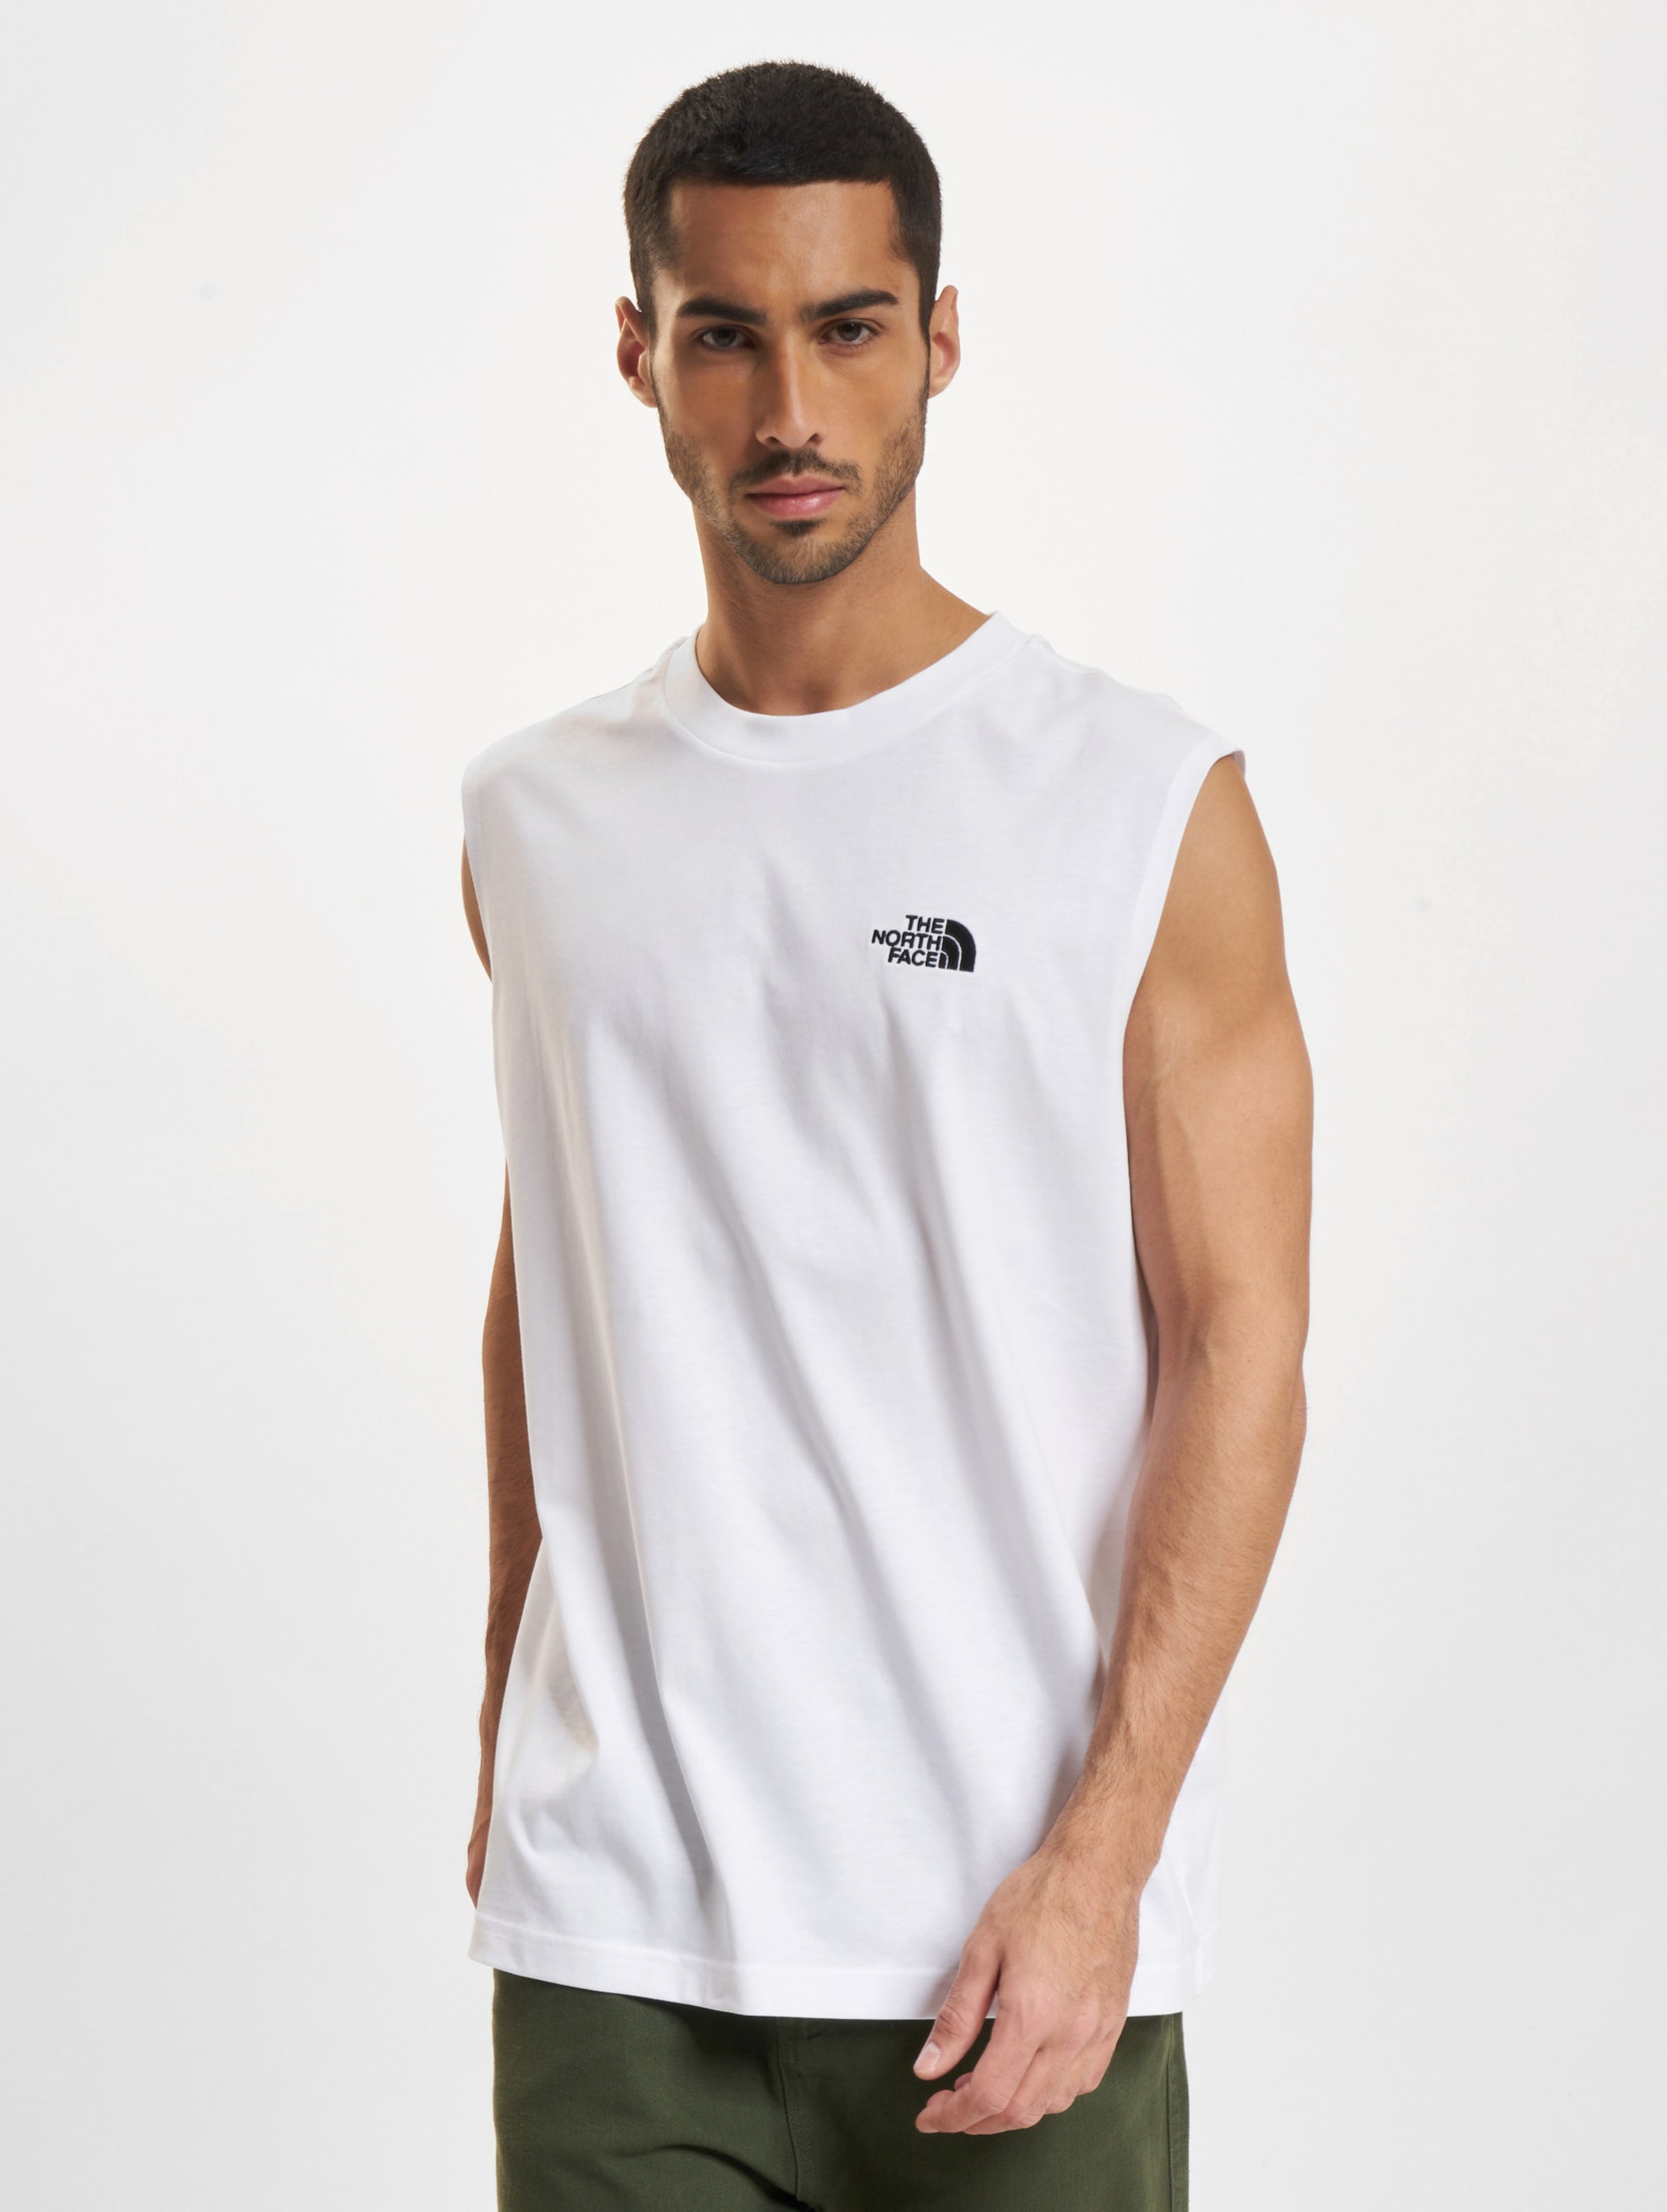 The North Face Oversize Simple Dome Tank Top Mannen op kleur wit, Maat M